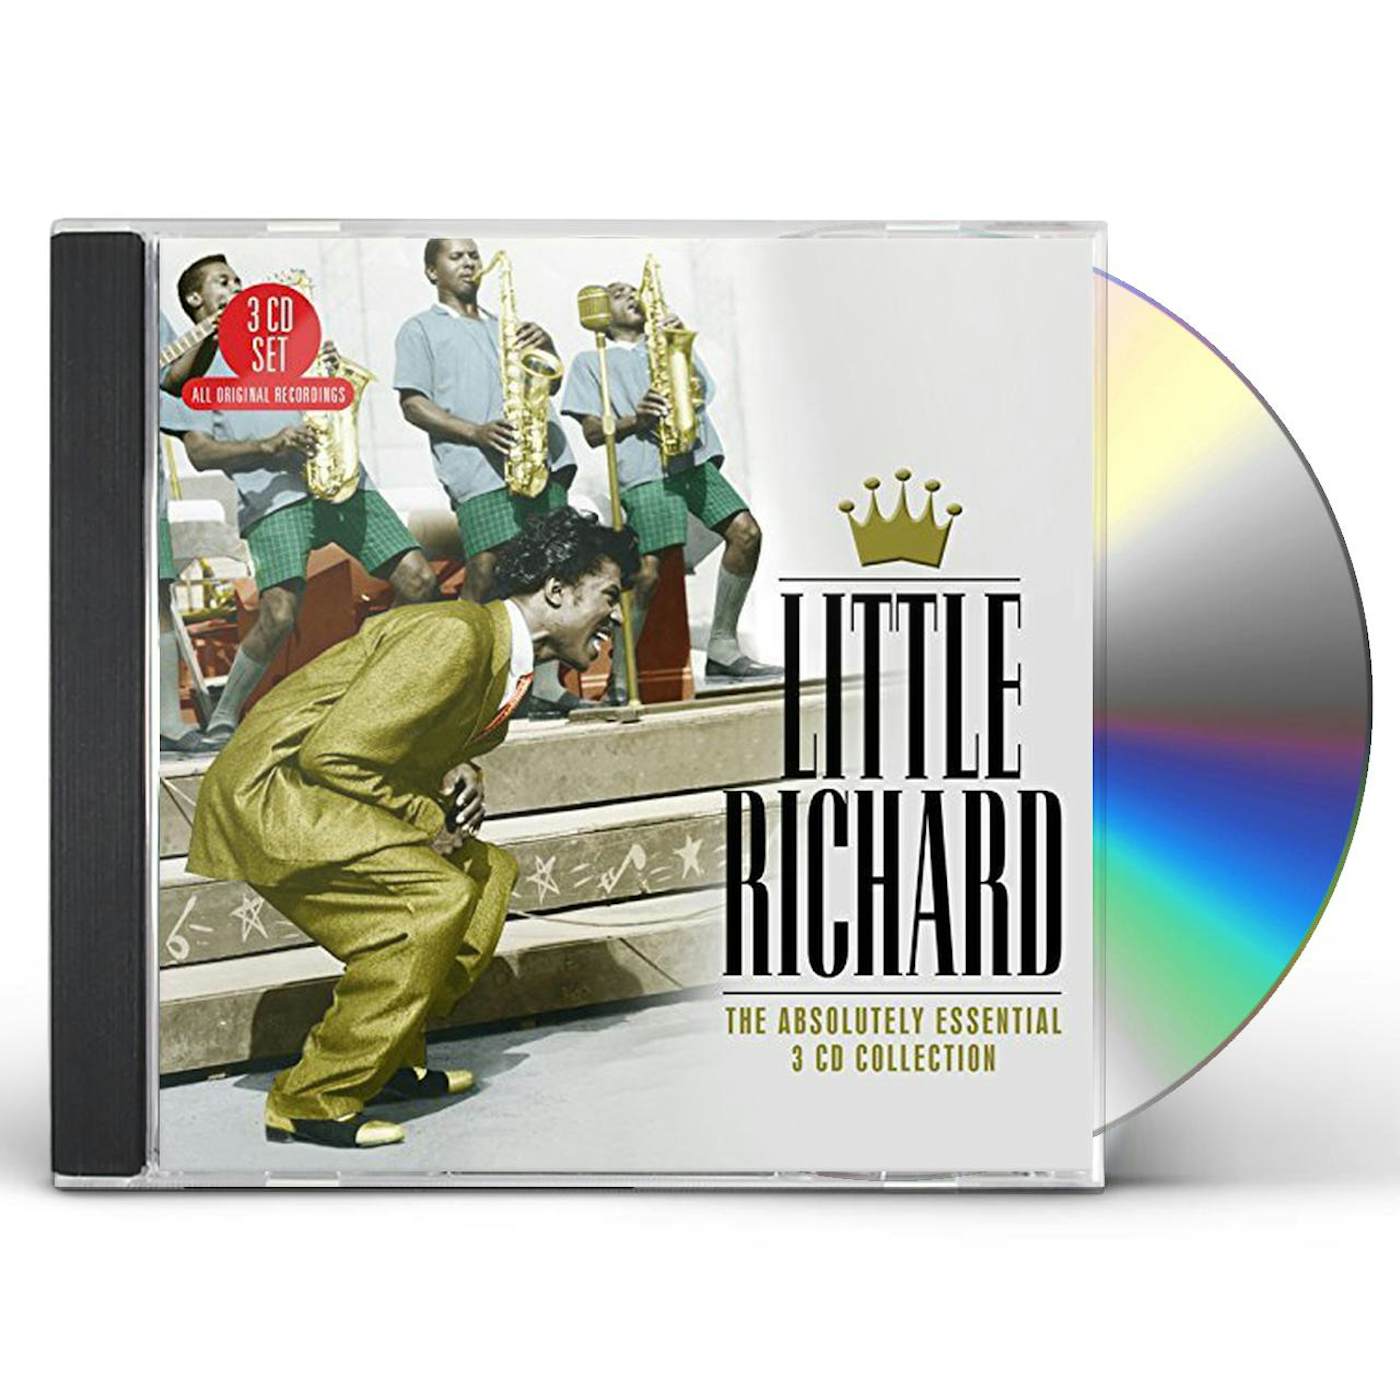 Little Richard ABSOLUTELY ESSENTIAL 3 CD COLLECTION CD